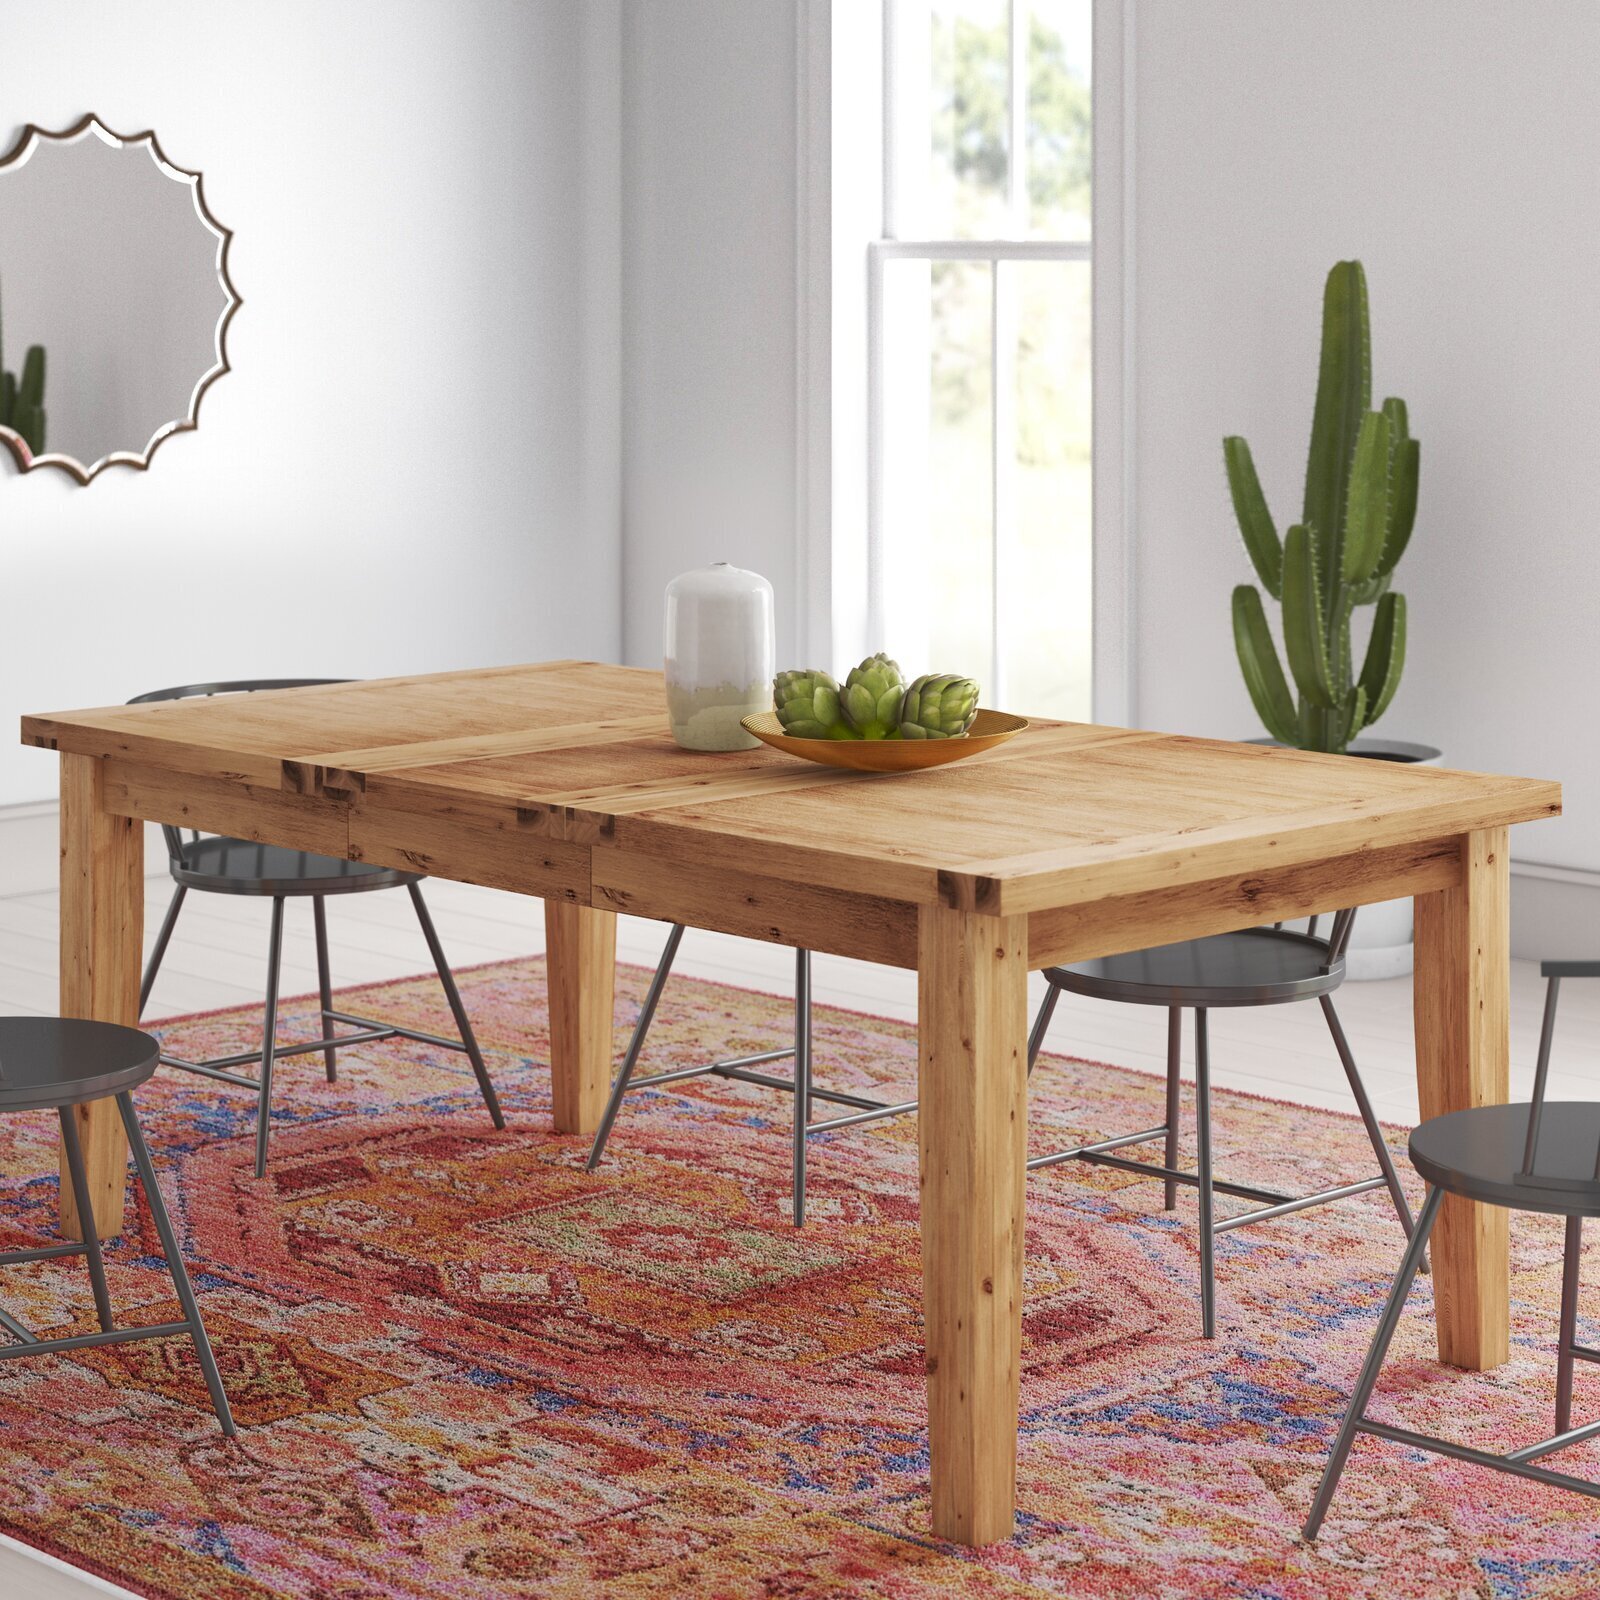 Coastal inspired dining table with built in leaf